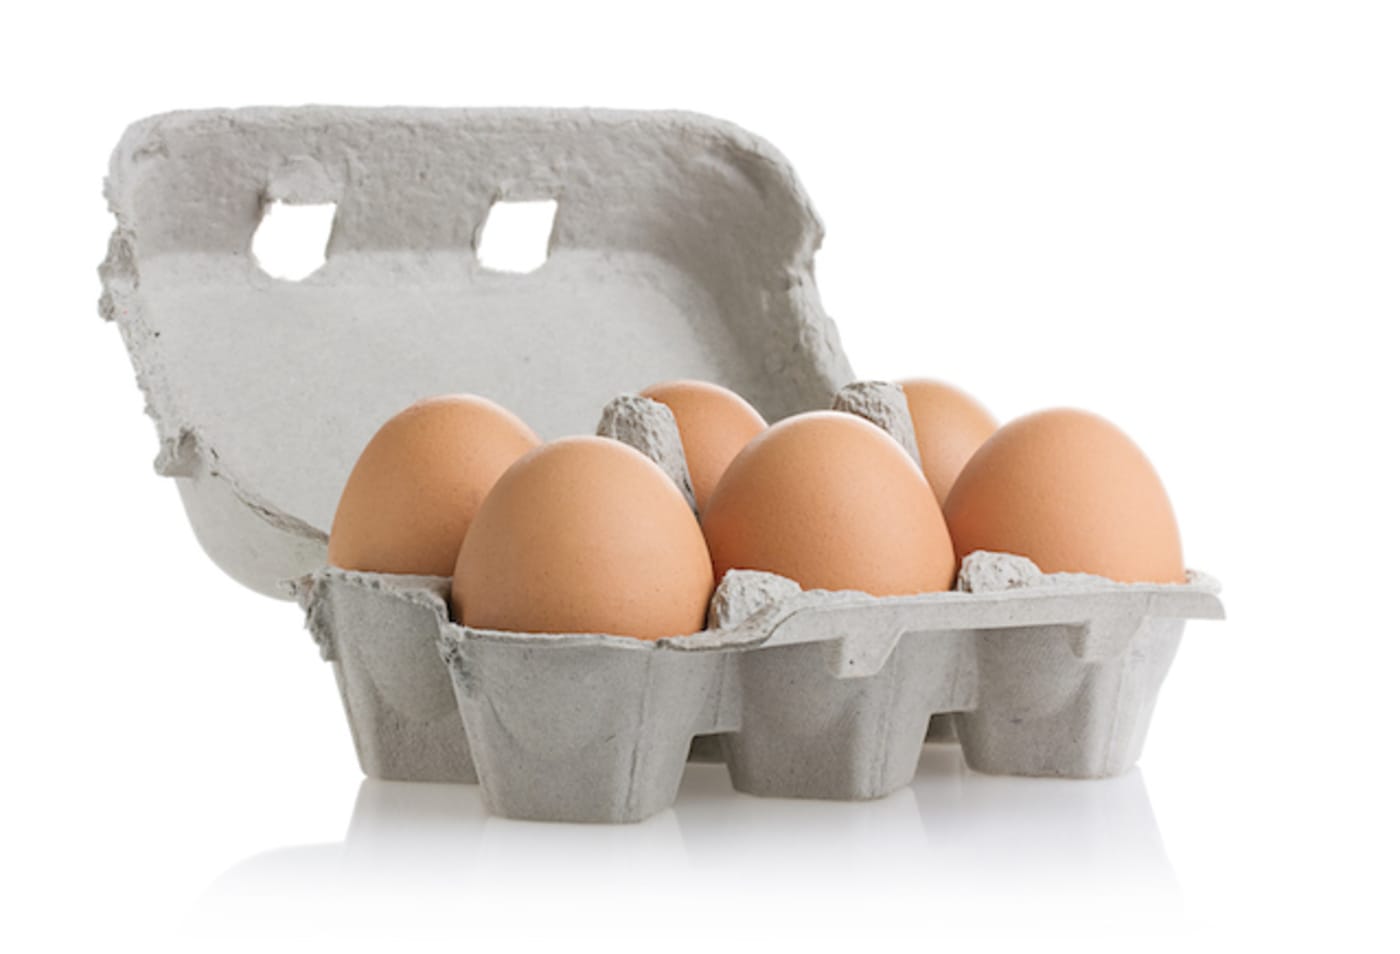 This is a picture of eggs.